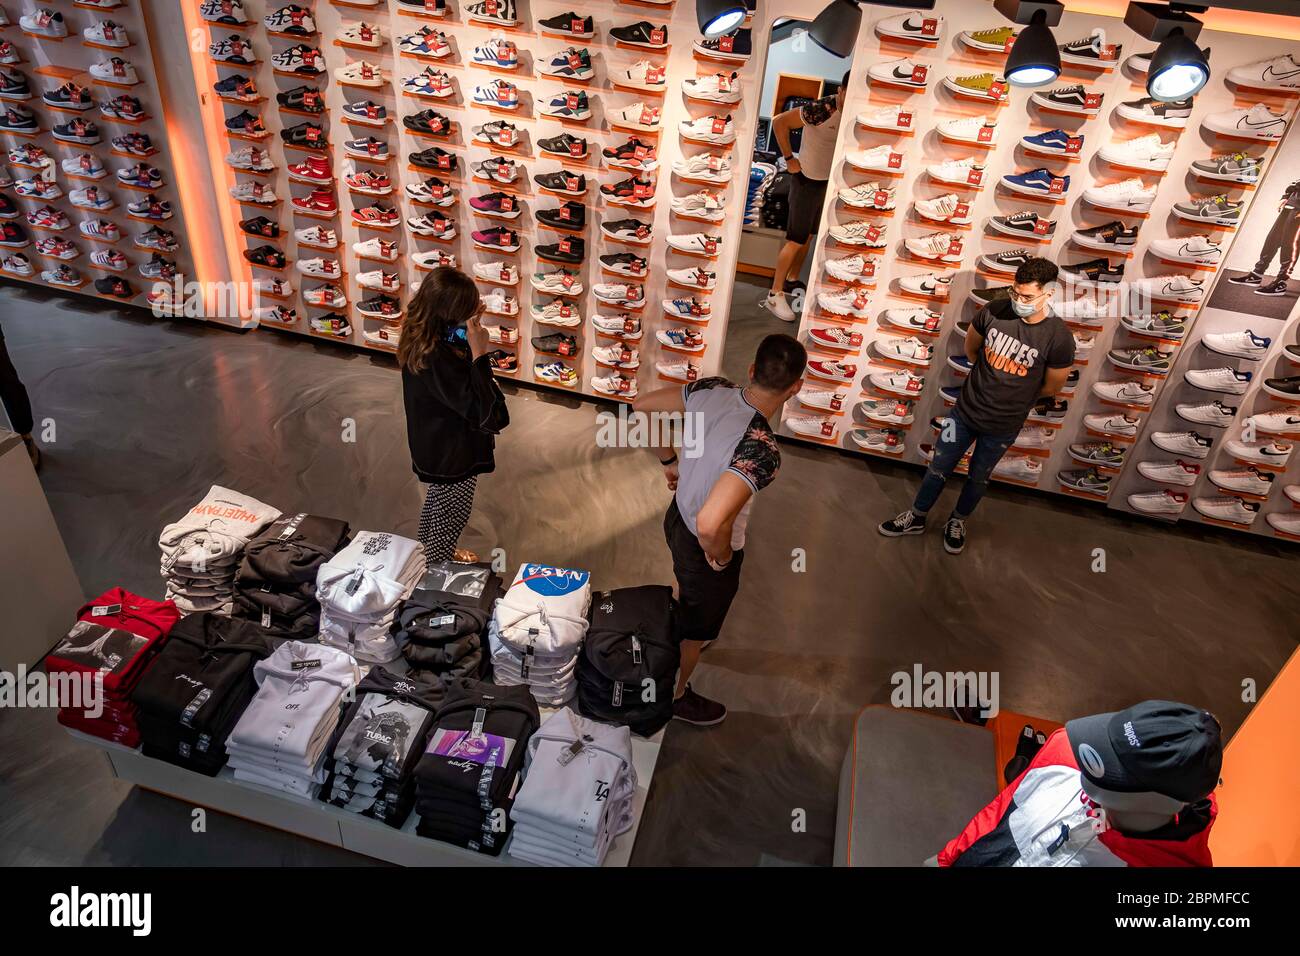 Barcelona, Catalonia, Spain. 18th May, 2020. People shopping at a shoe store during the partial reopening of businesses.Barcelona begins Phase 0.5, one step below Phase 1. Stores with an area of less than 400 square meters can open with limited capacity and hygienic measures due to the Covid-19. Credit: Paco Freire/SOPA Images/ZUMA Wire/Alamy Live News Stock Photo